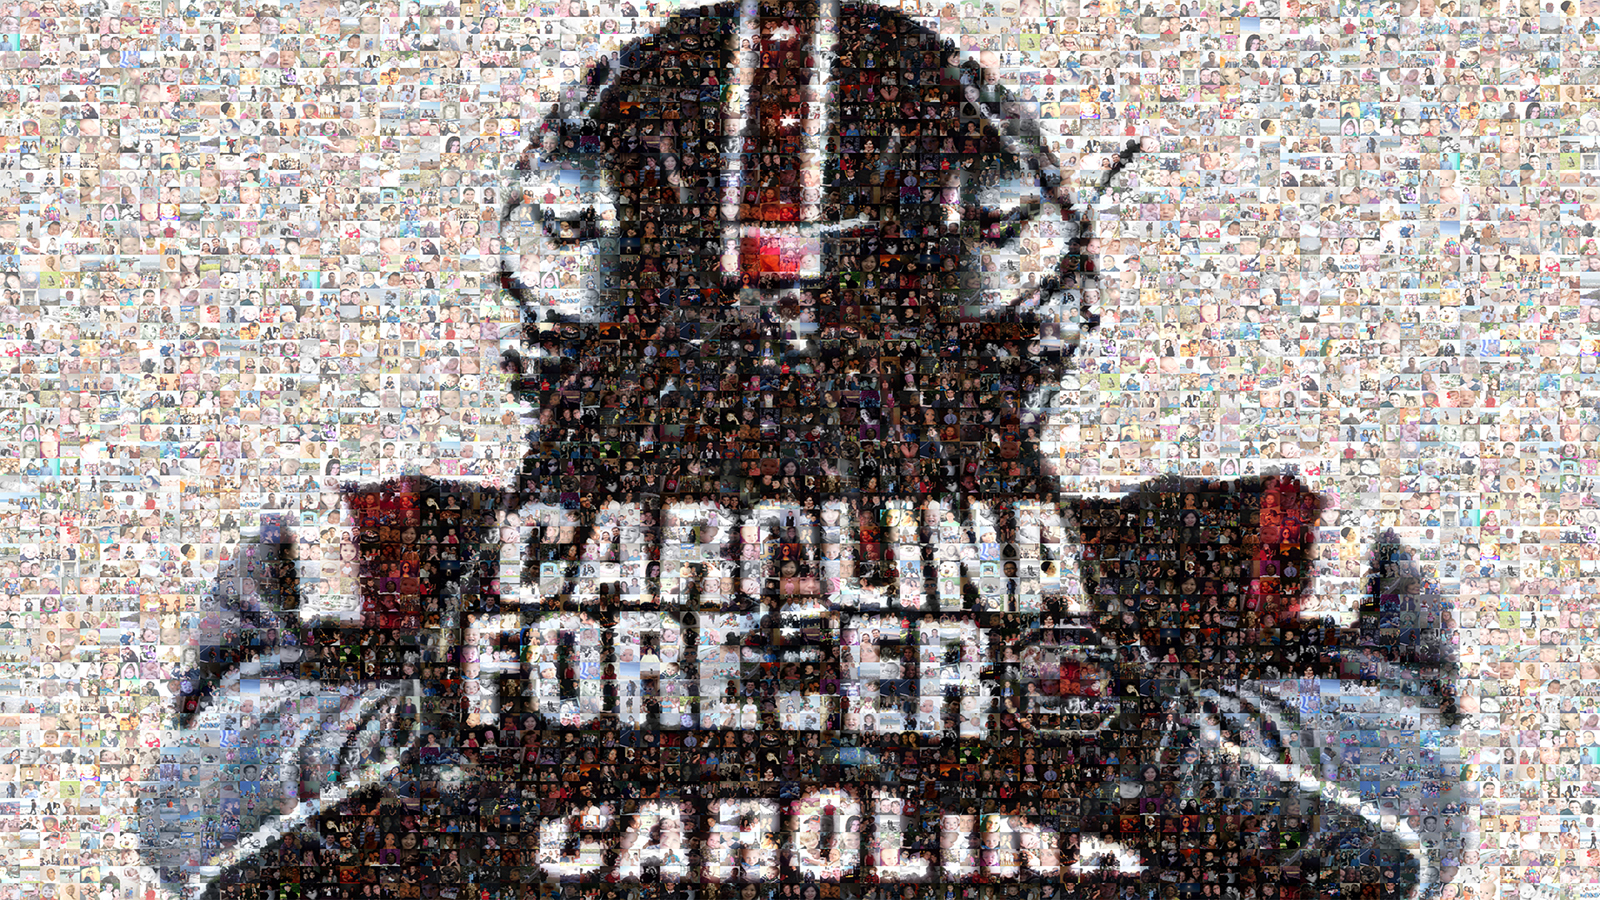 Fans Invited to Take Part in Carolina Forever Project